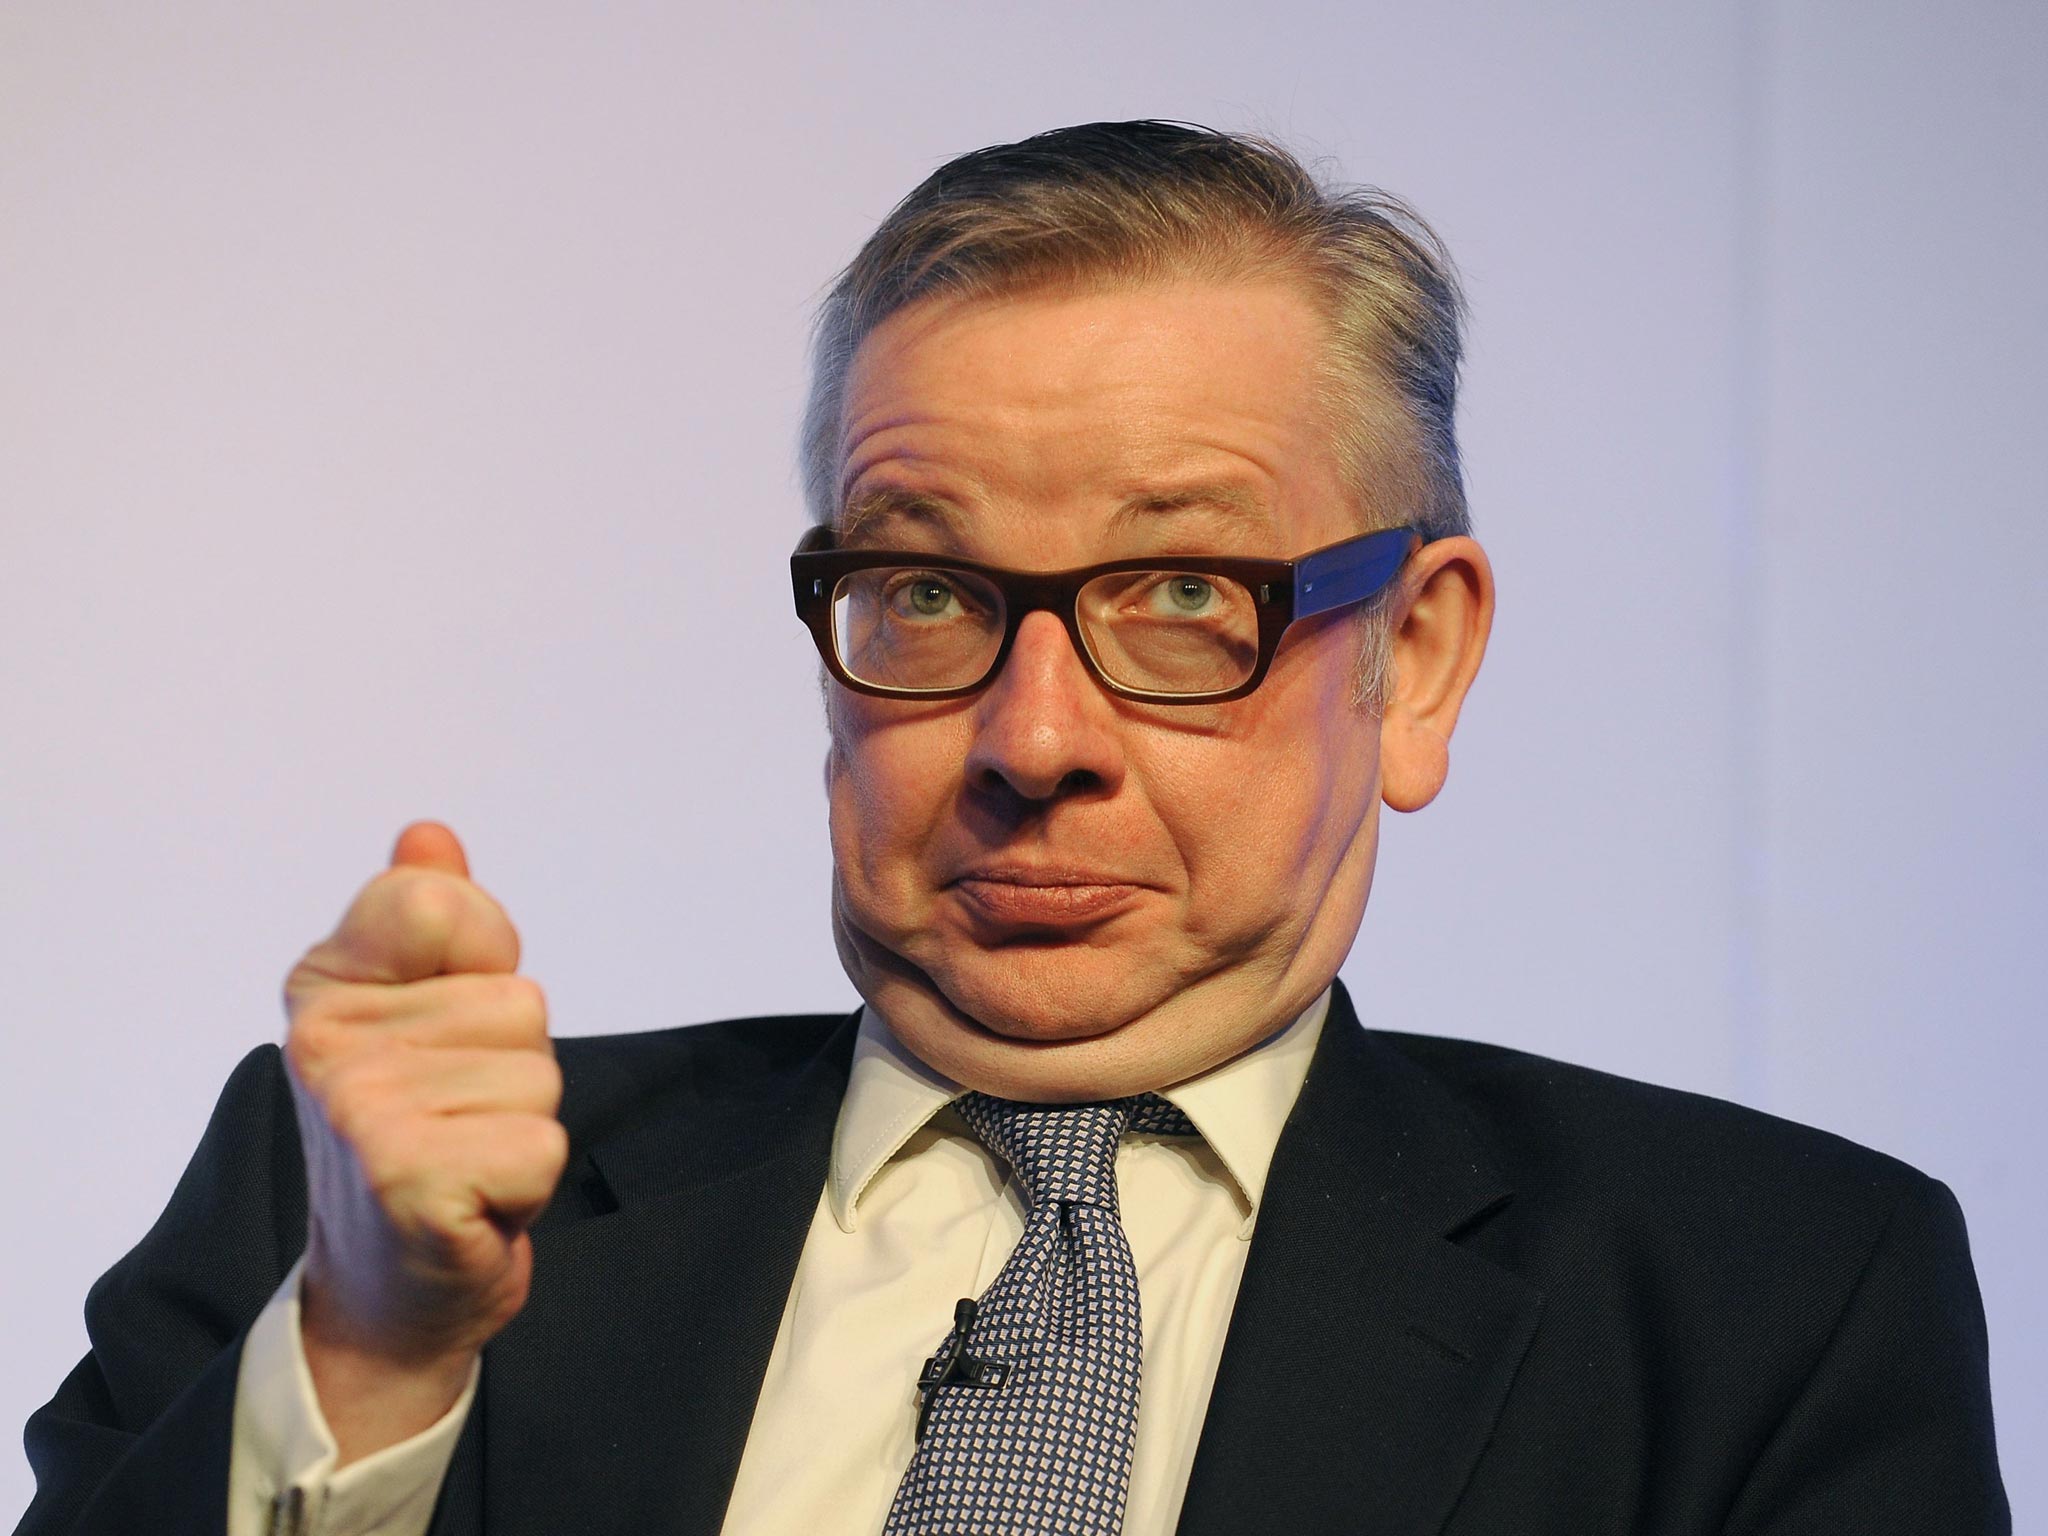 Dear Mr Gove, by Jess Green, has been viewed tens of thousands of times on YouTube